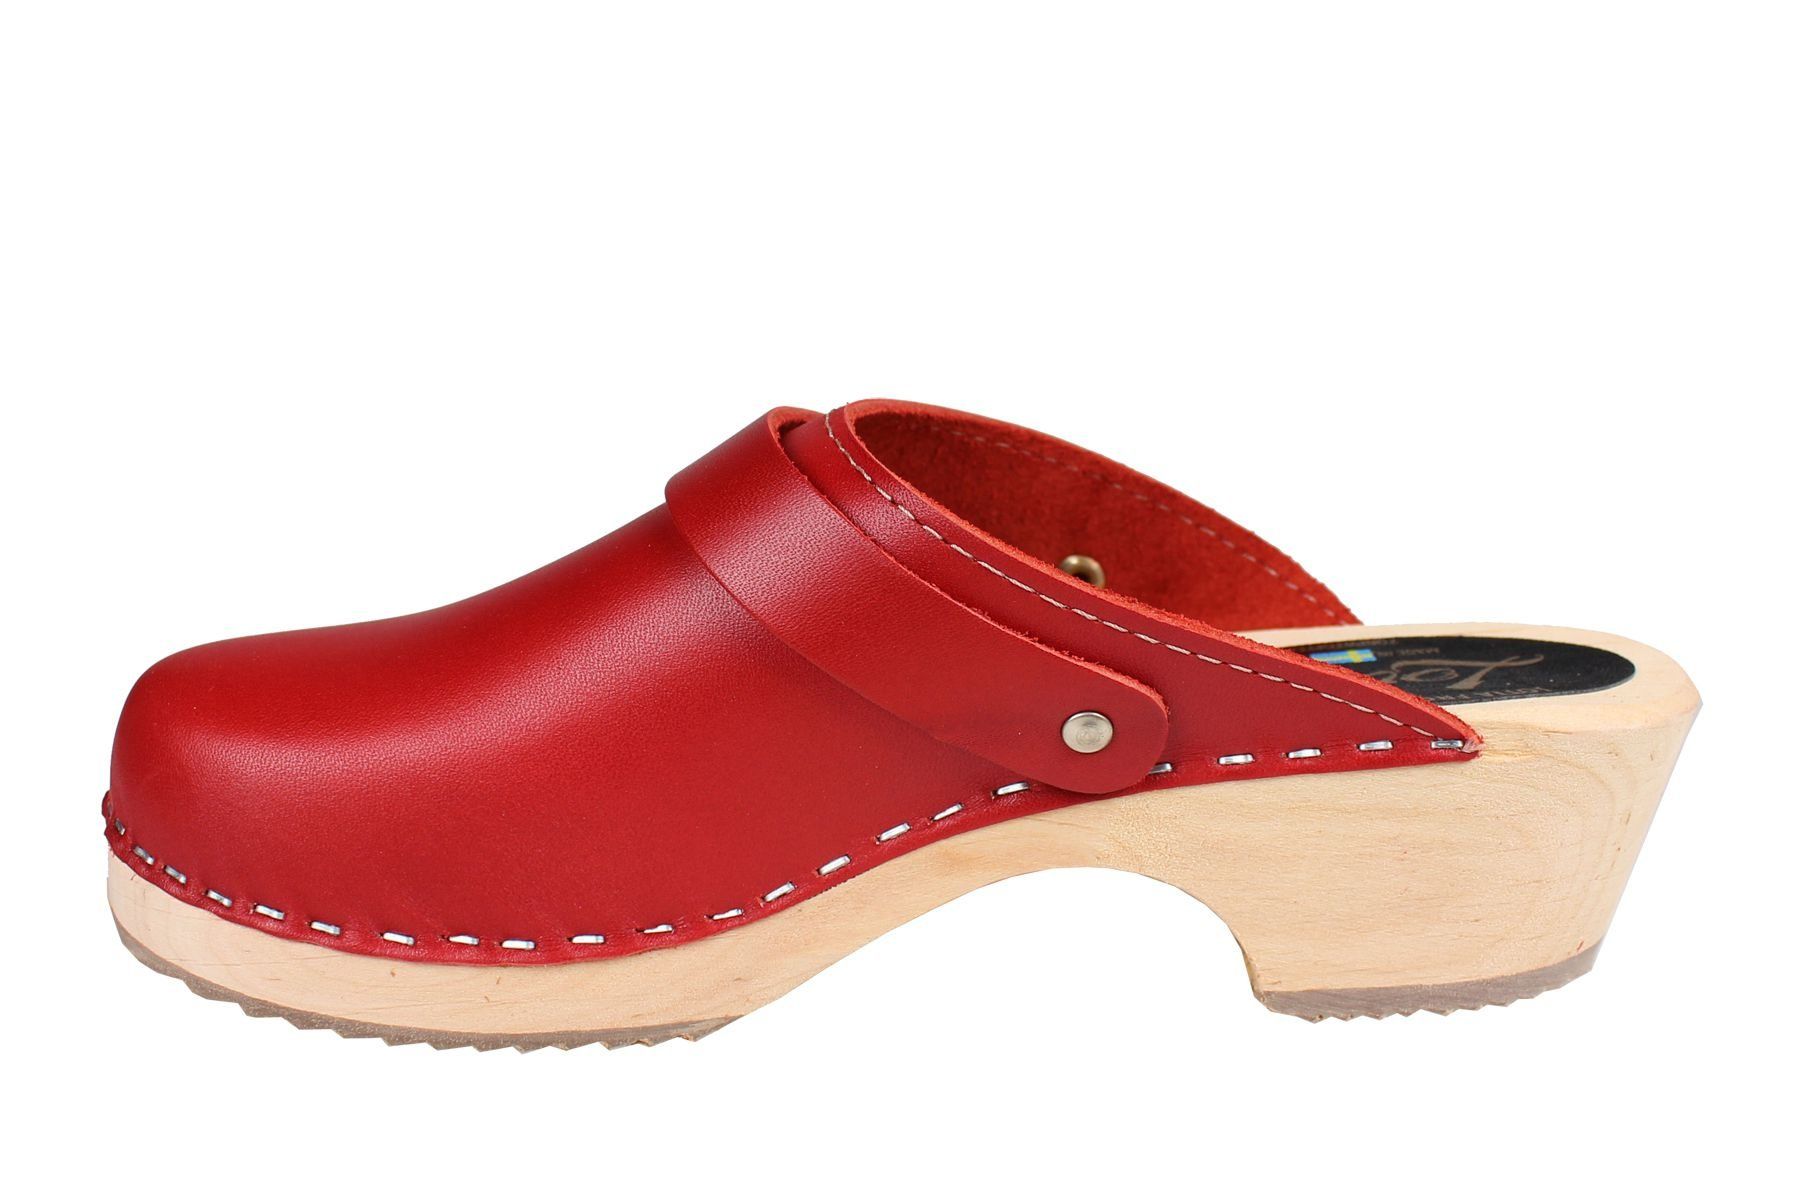 Classic Red Leather Clogs with strap |Lotta from Stockholm